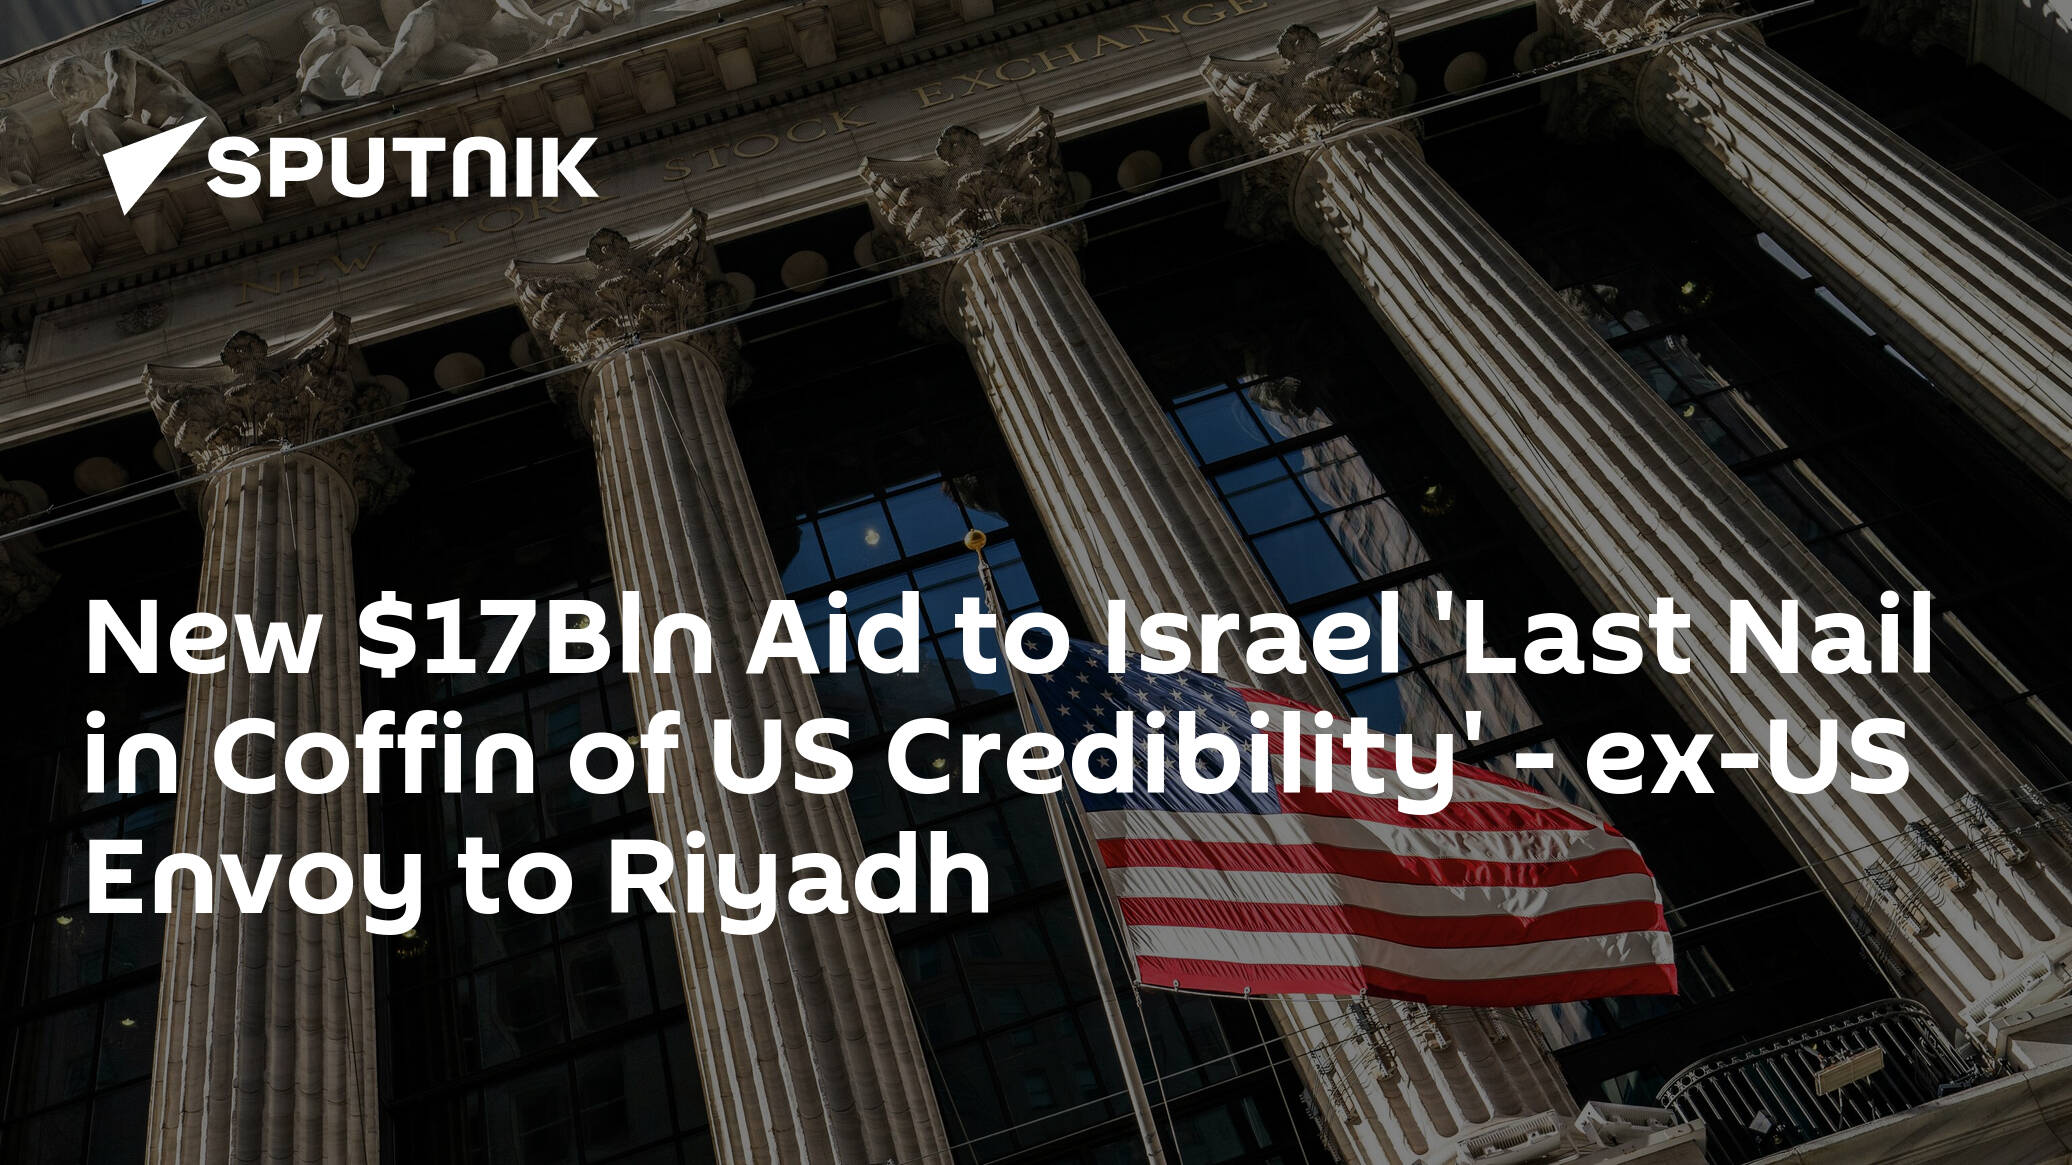 New Bln Aid to Israel 'Last Nail in Coffin of US Credibility' – ex-US Envoy to Riyadh